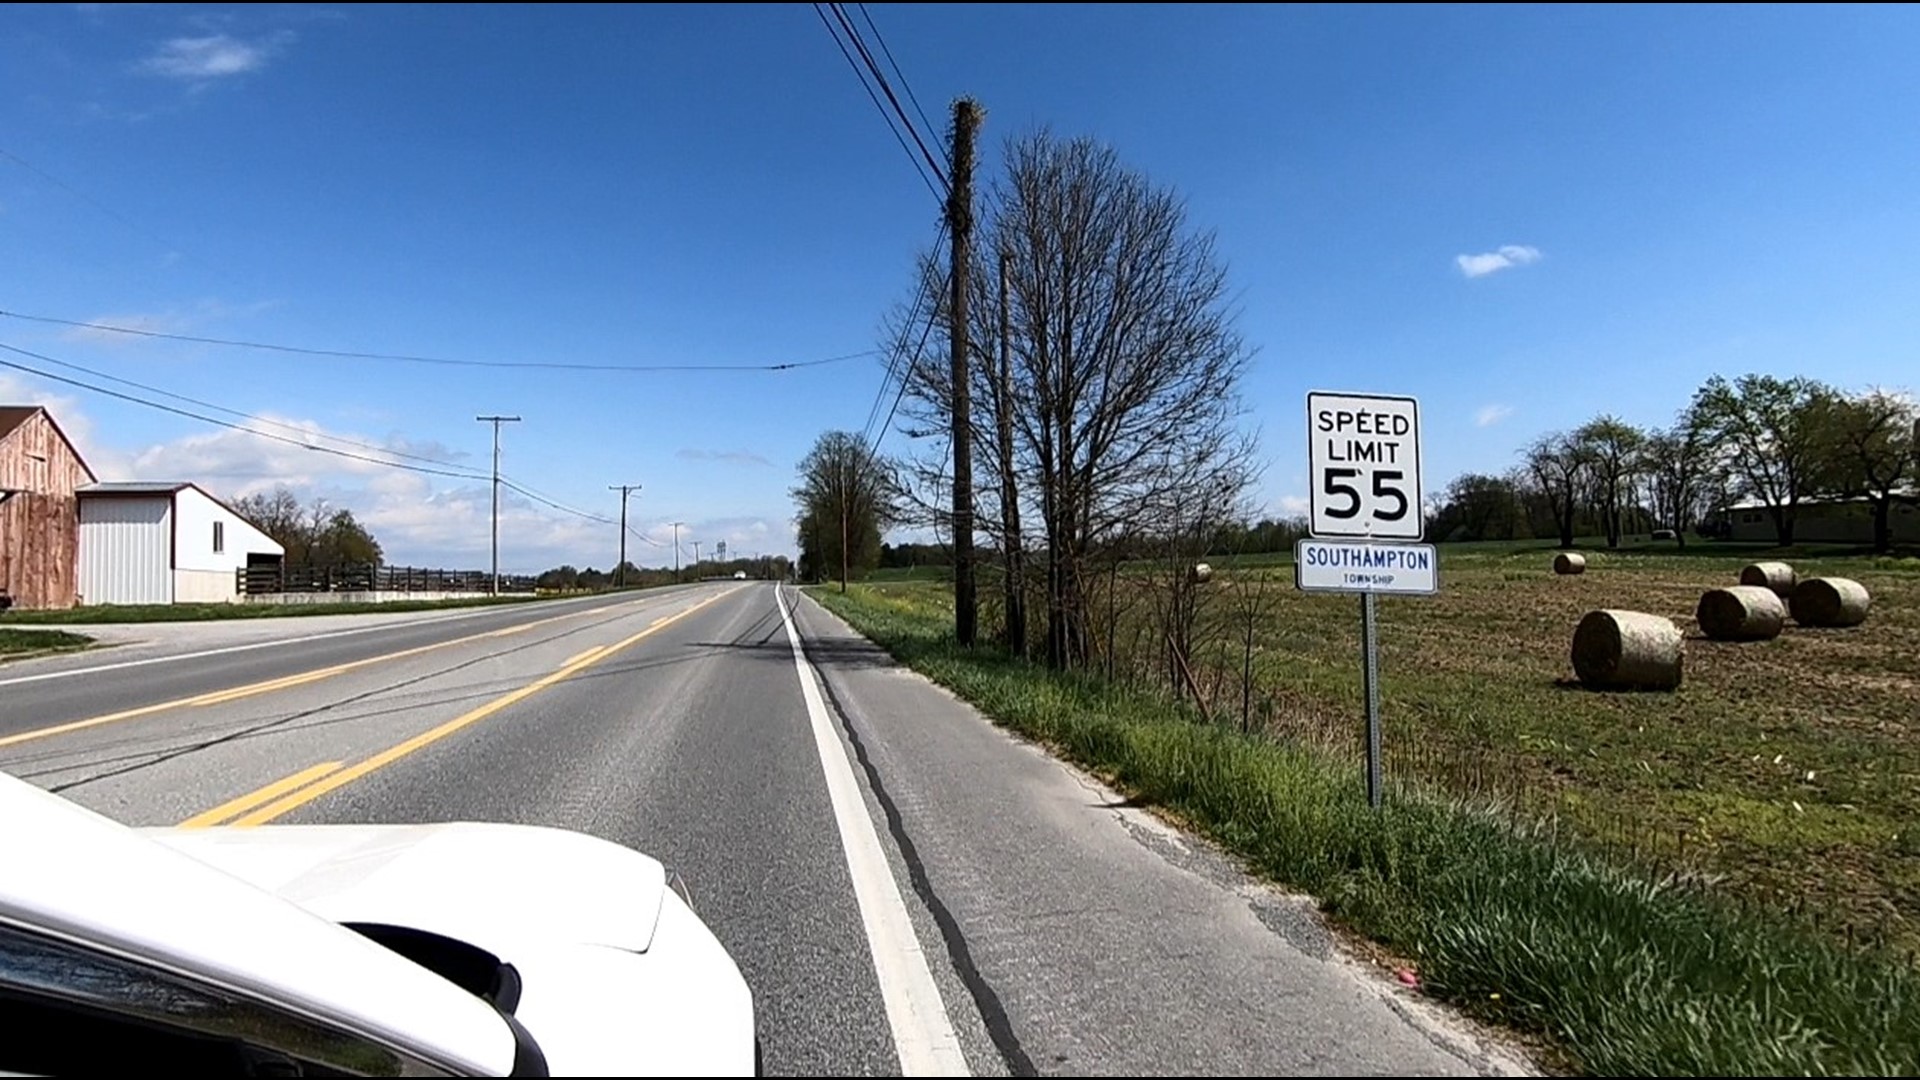 One Franklin County woman is on a mission to lower the speed limit where she lives, but has discovered it's not an easy process.